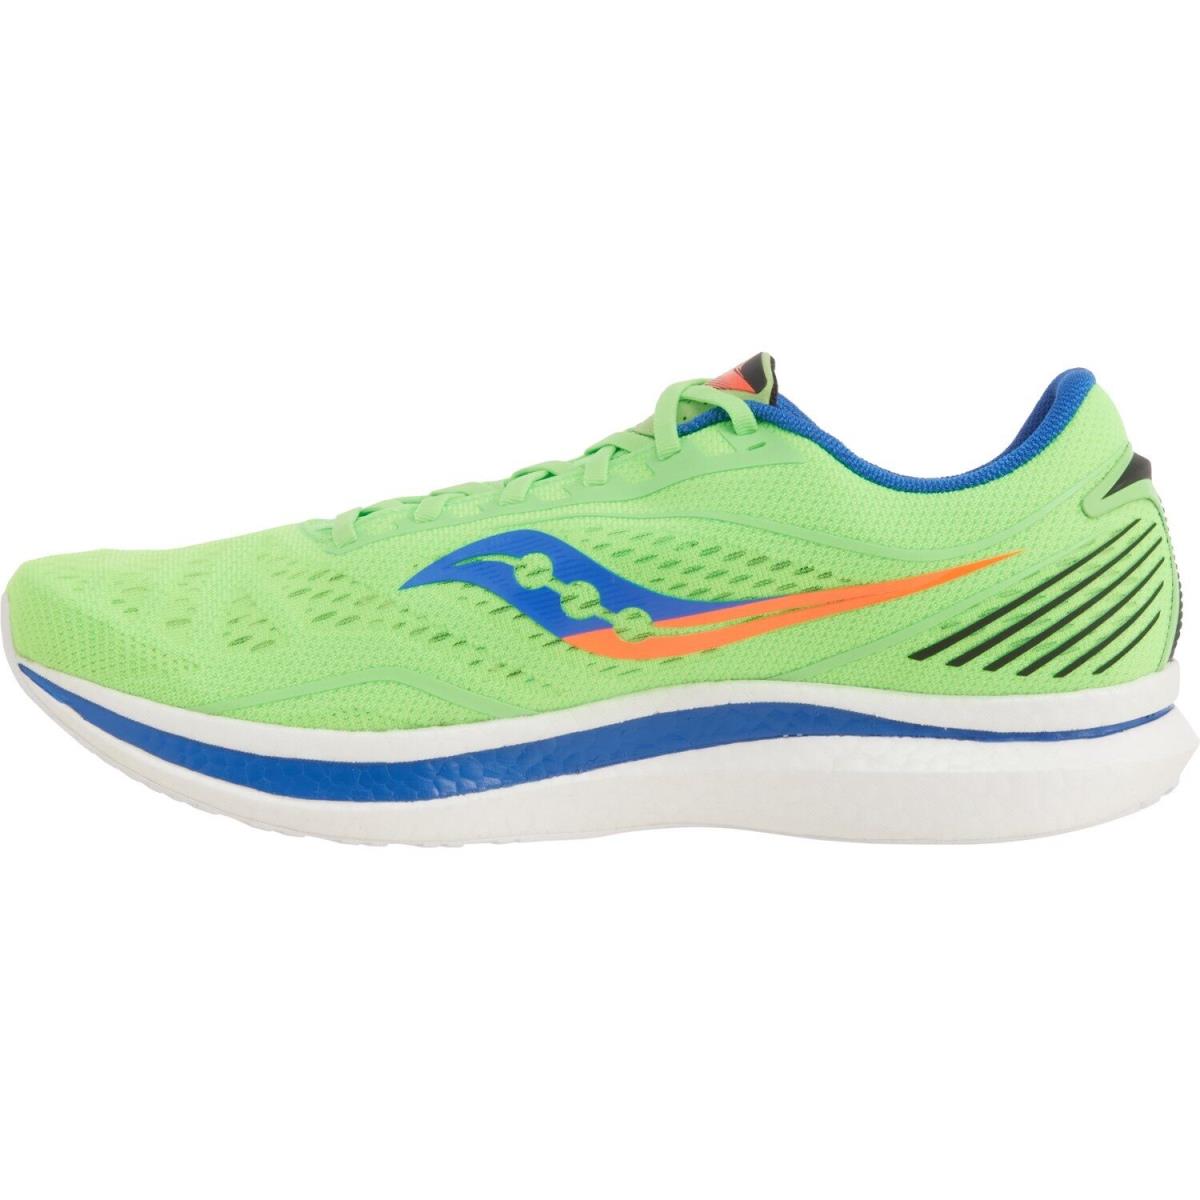 Saucony shoes Endorphin Speed Pitti - Green/Blue 1